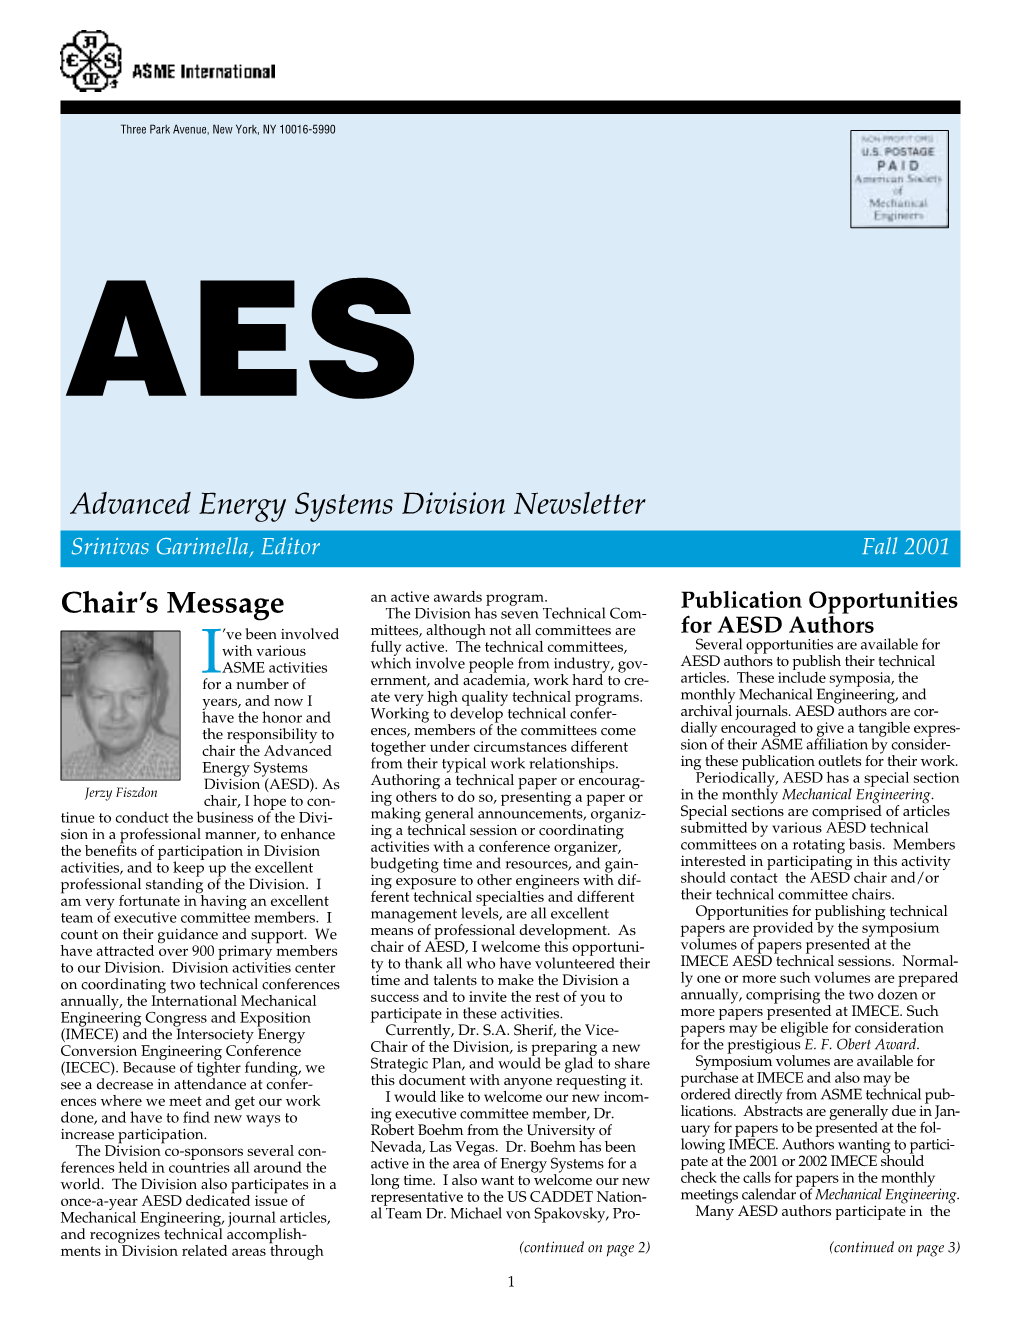 Chair's Message Advanced Energy Systems Division Newsletter